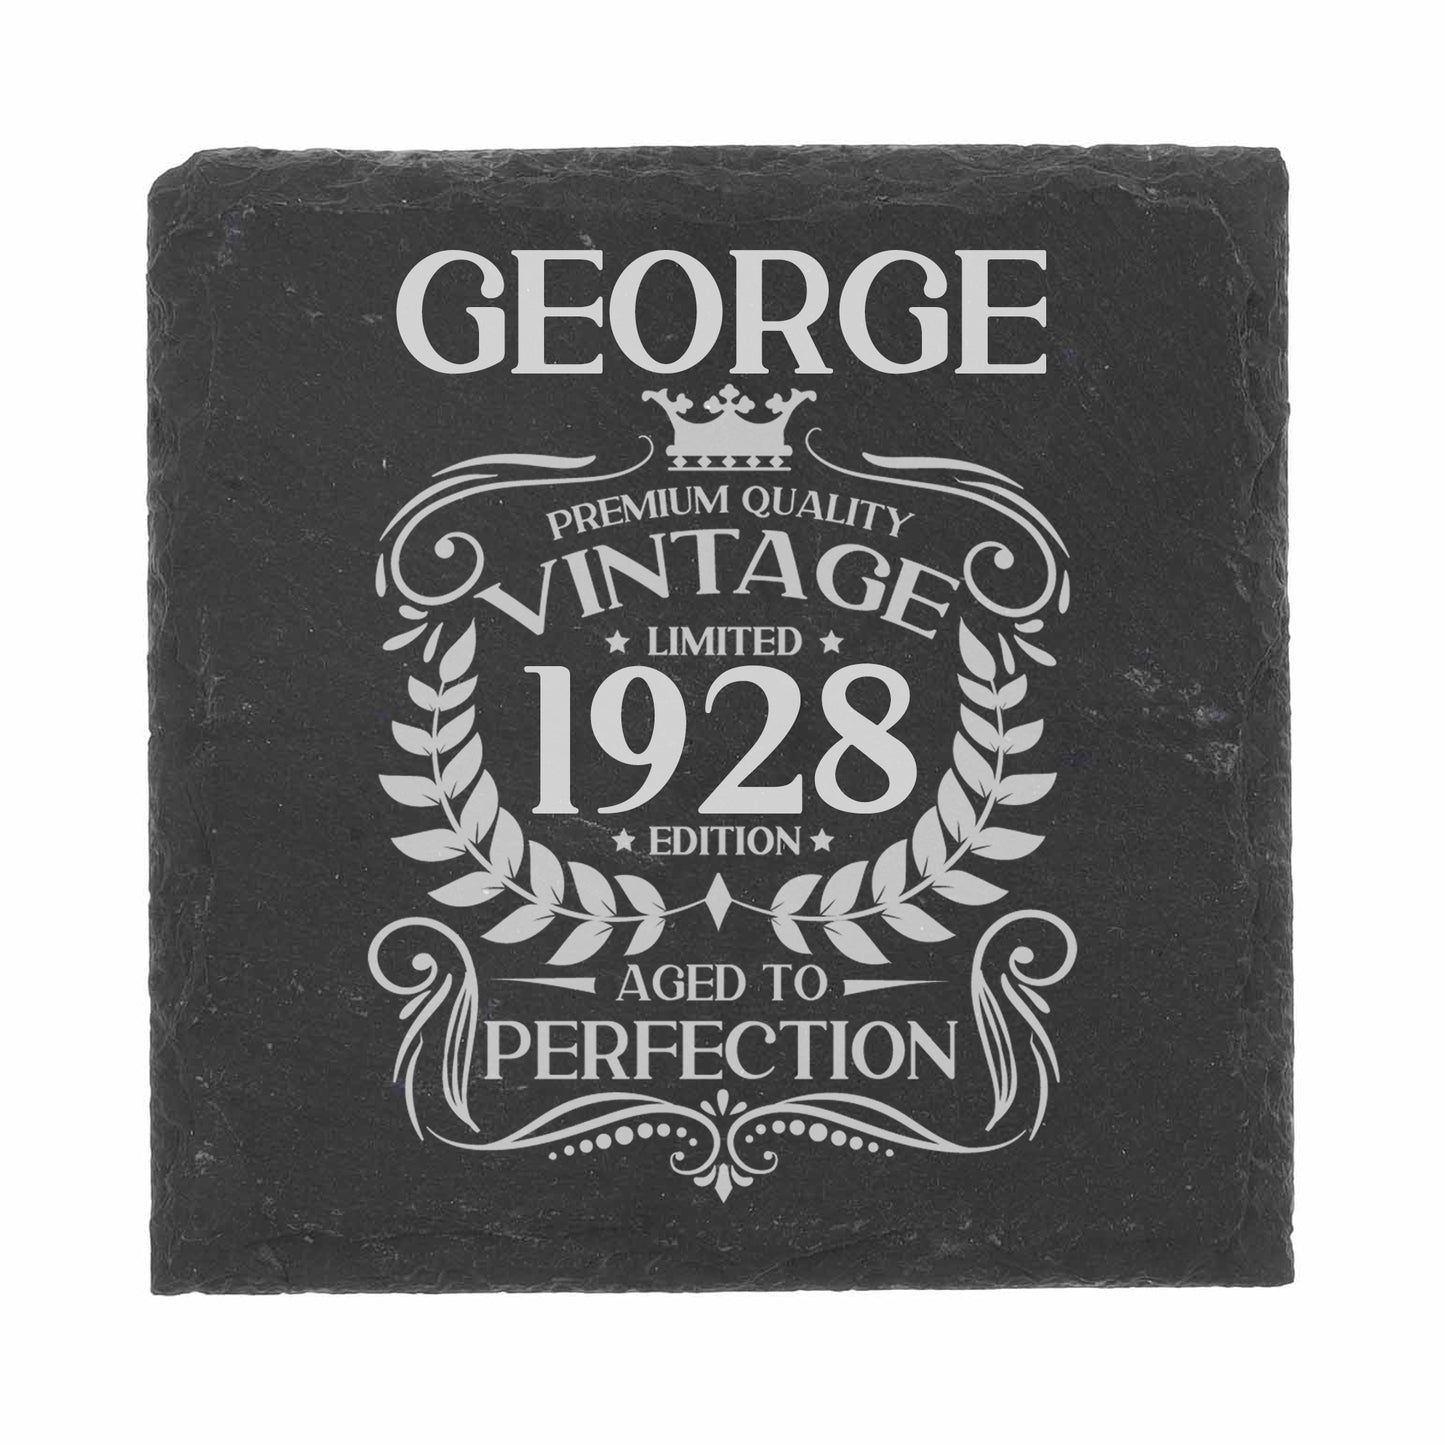 Personalised Vintage 1928 Mug and/or Coaster  - Always Looking Good - Square Coaster On Its Own  